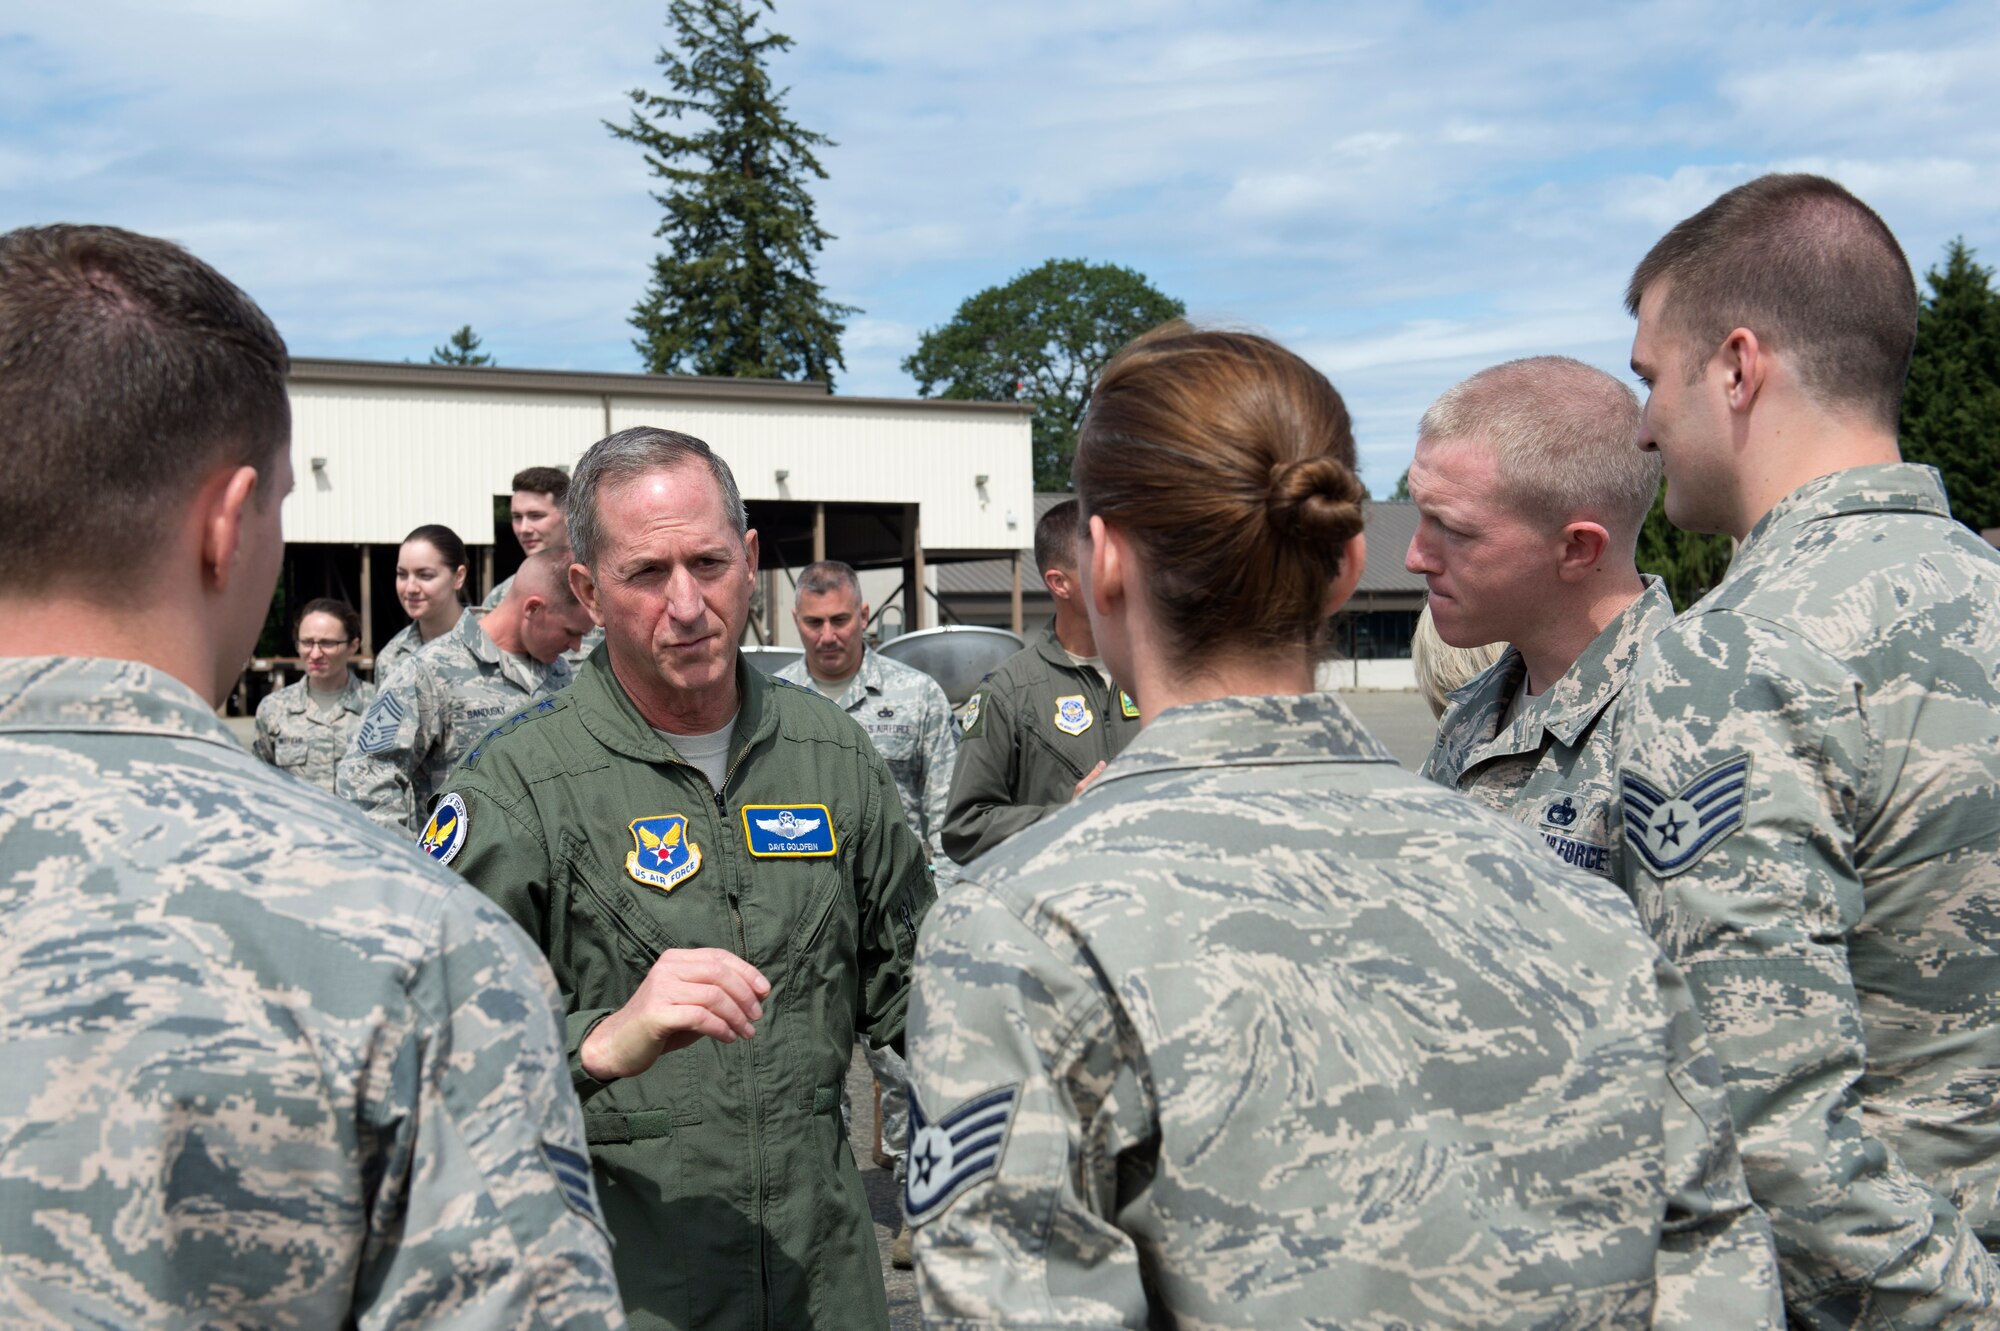 Gen David Goldfein, Chief of Staff of the Air Force, talks with members of the 62nd Aerial Port Squadron, June 5, 2018, at Joint Base Lewis-McChord, Wash. Goldfein and the Airmen had the opportunity to discuss how they support not only Airmen but Soldiers as well as part of the joint base. (U.S. Air Force photo by A1C Sara Hoerichs)